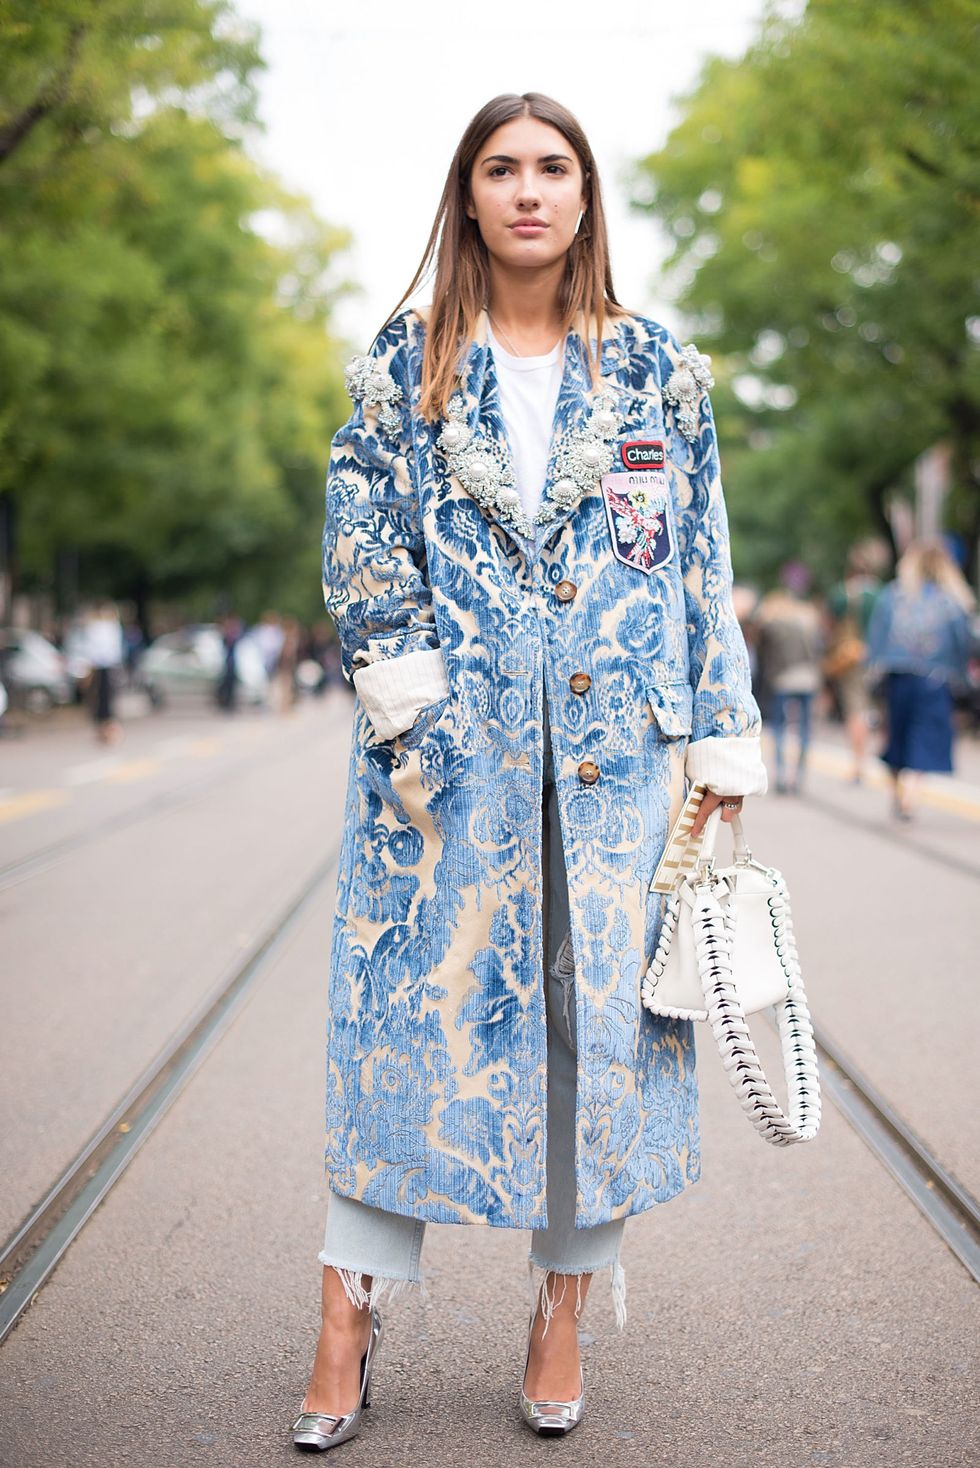 <p>As summer heat gives way to crisp autumn air, usher in the cooler temps with a chic new coat. This season, romantic tapestry styles are having a moment.&nbsp;</p>